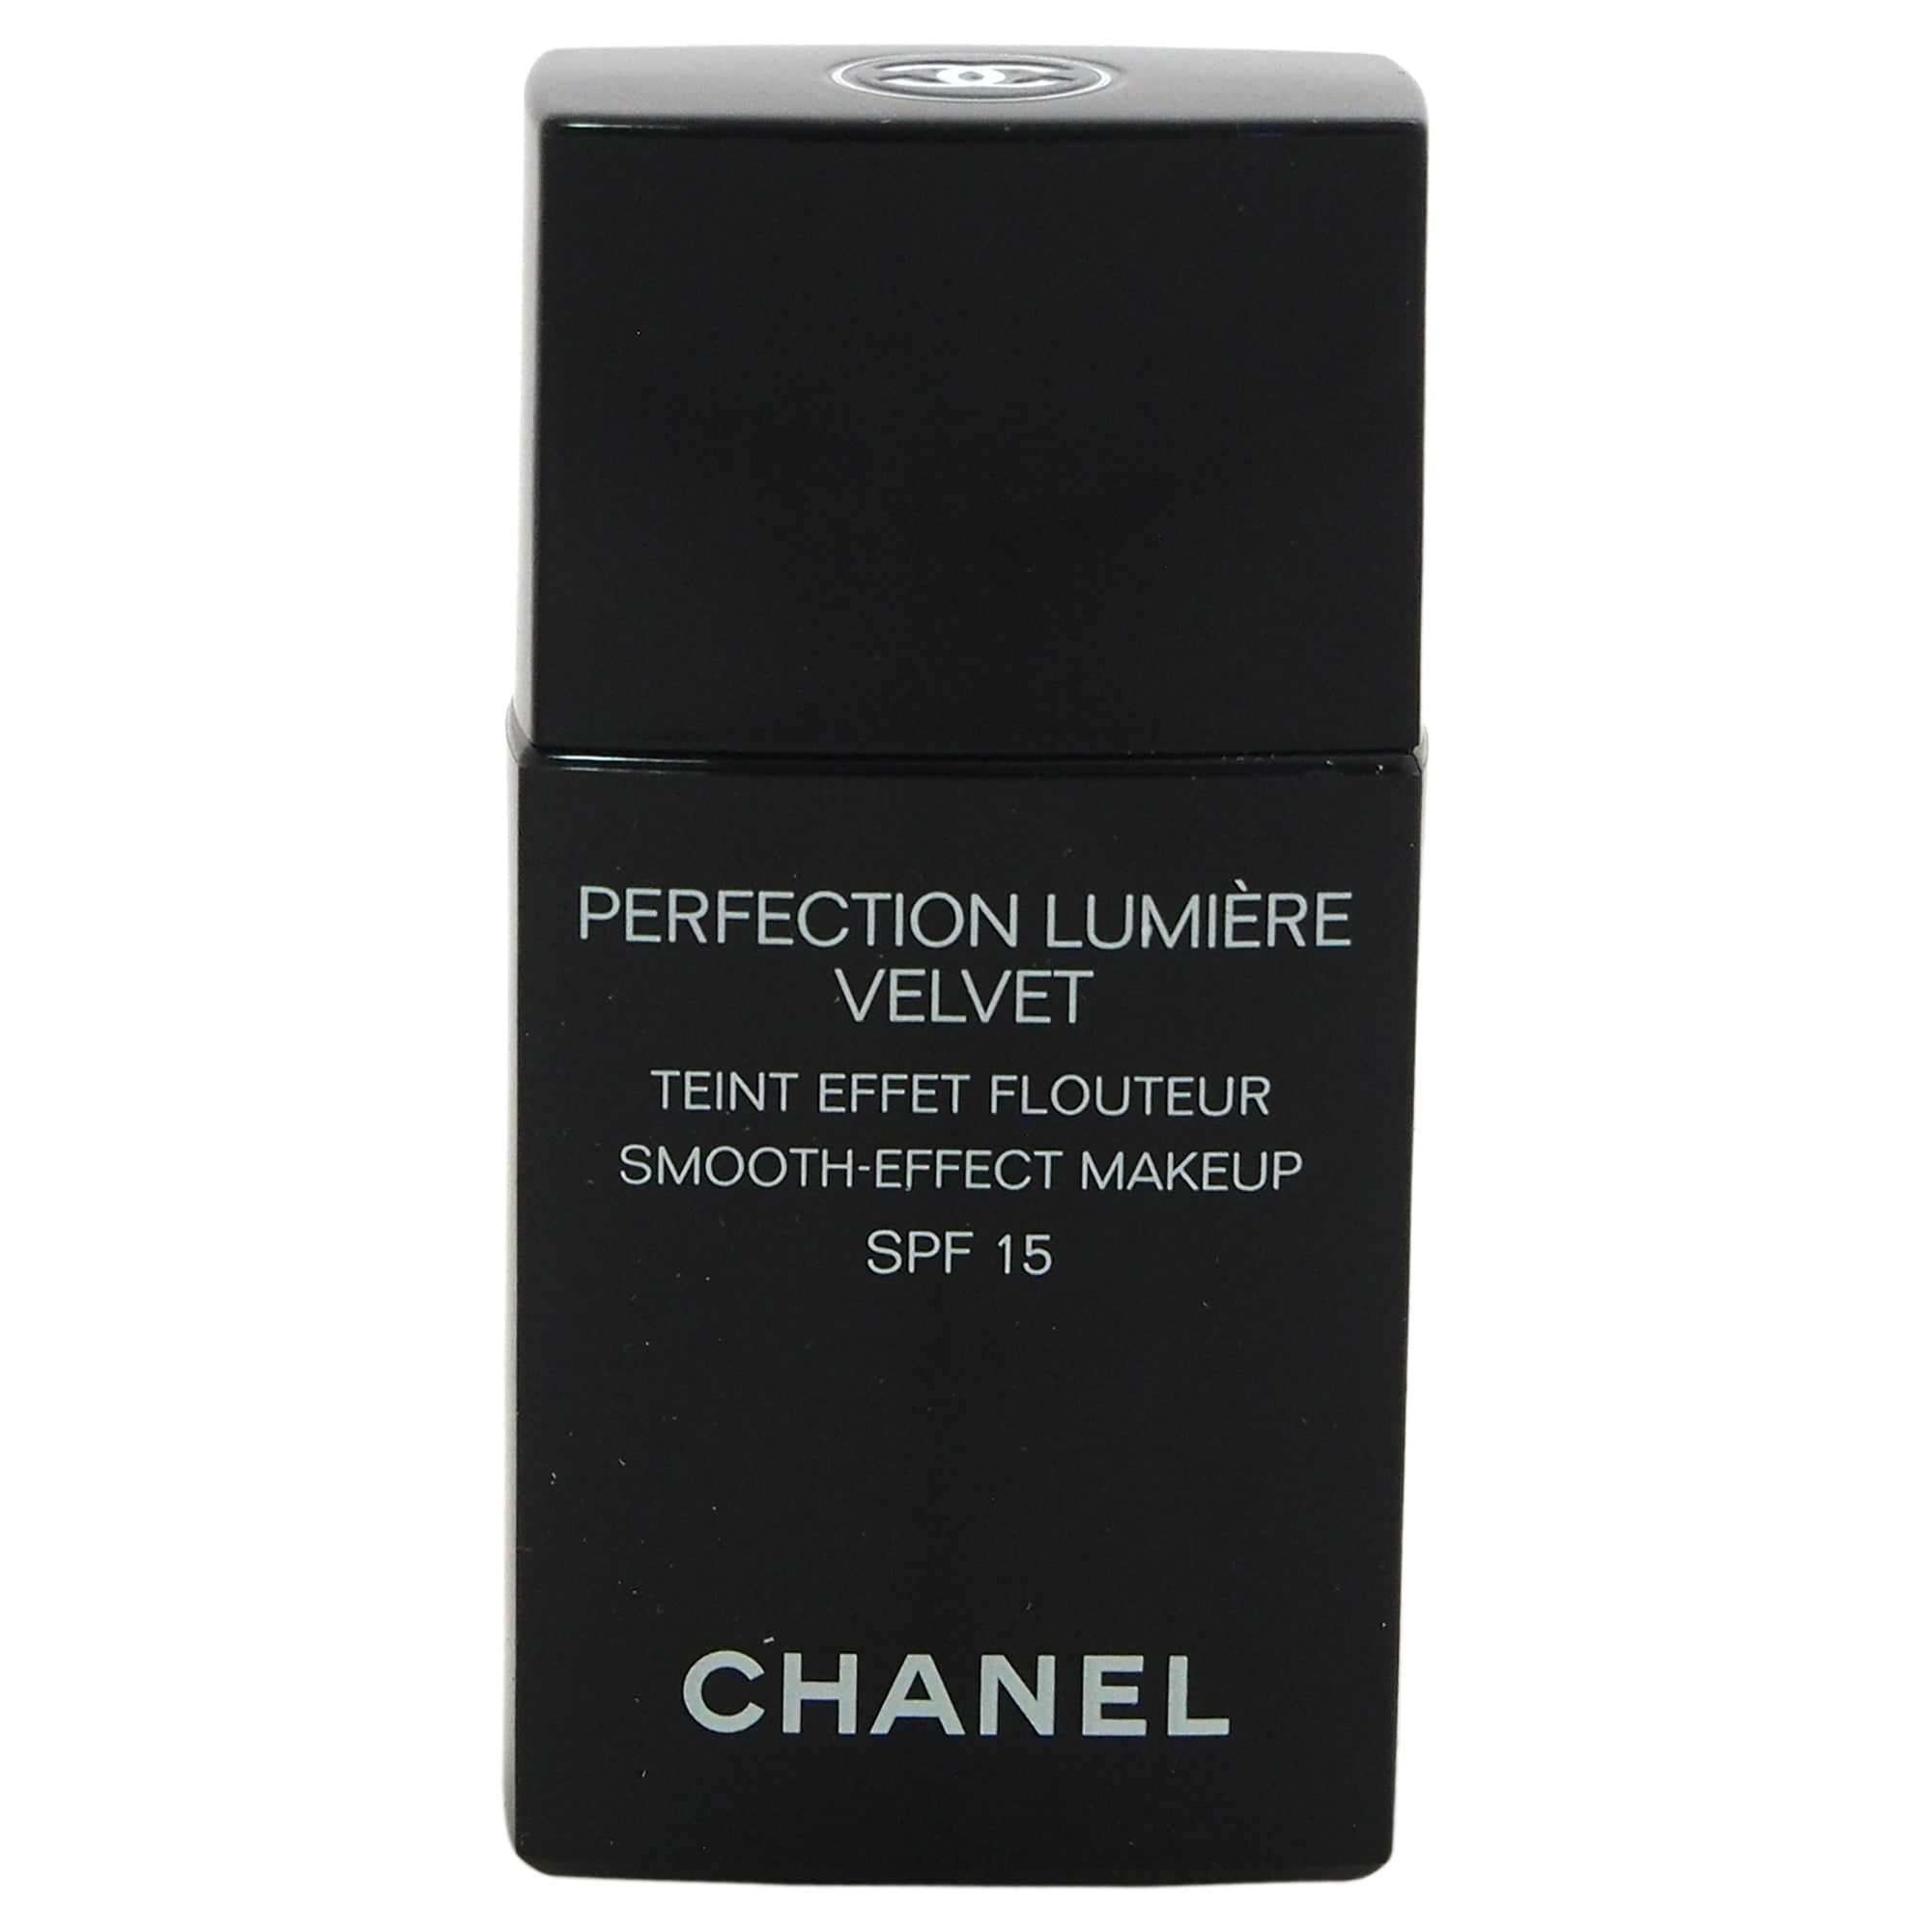 Chanel Perfection Lumiere Velvet Smooth Effect Makeup, Beige 1 oz